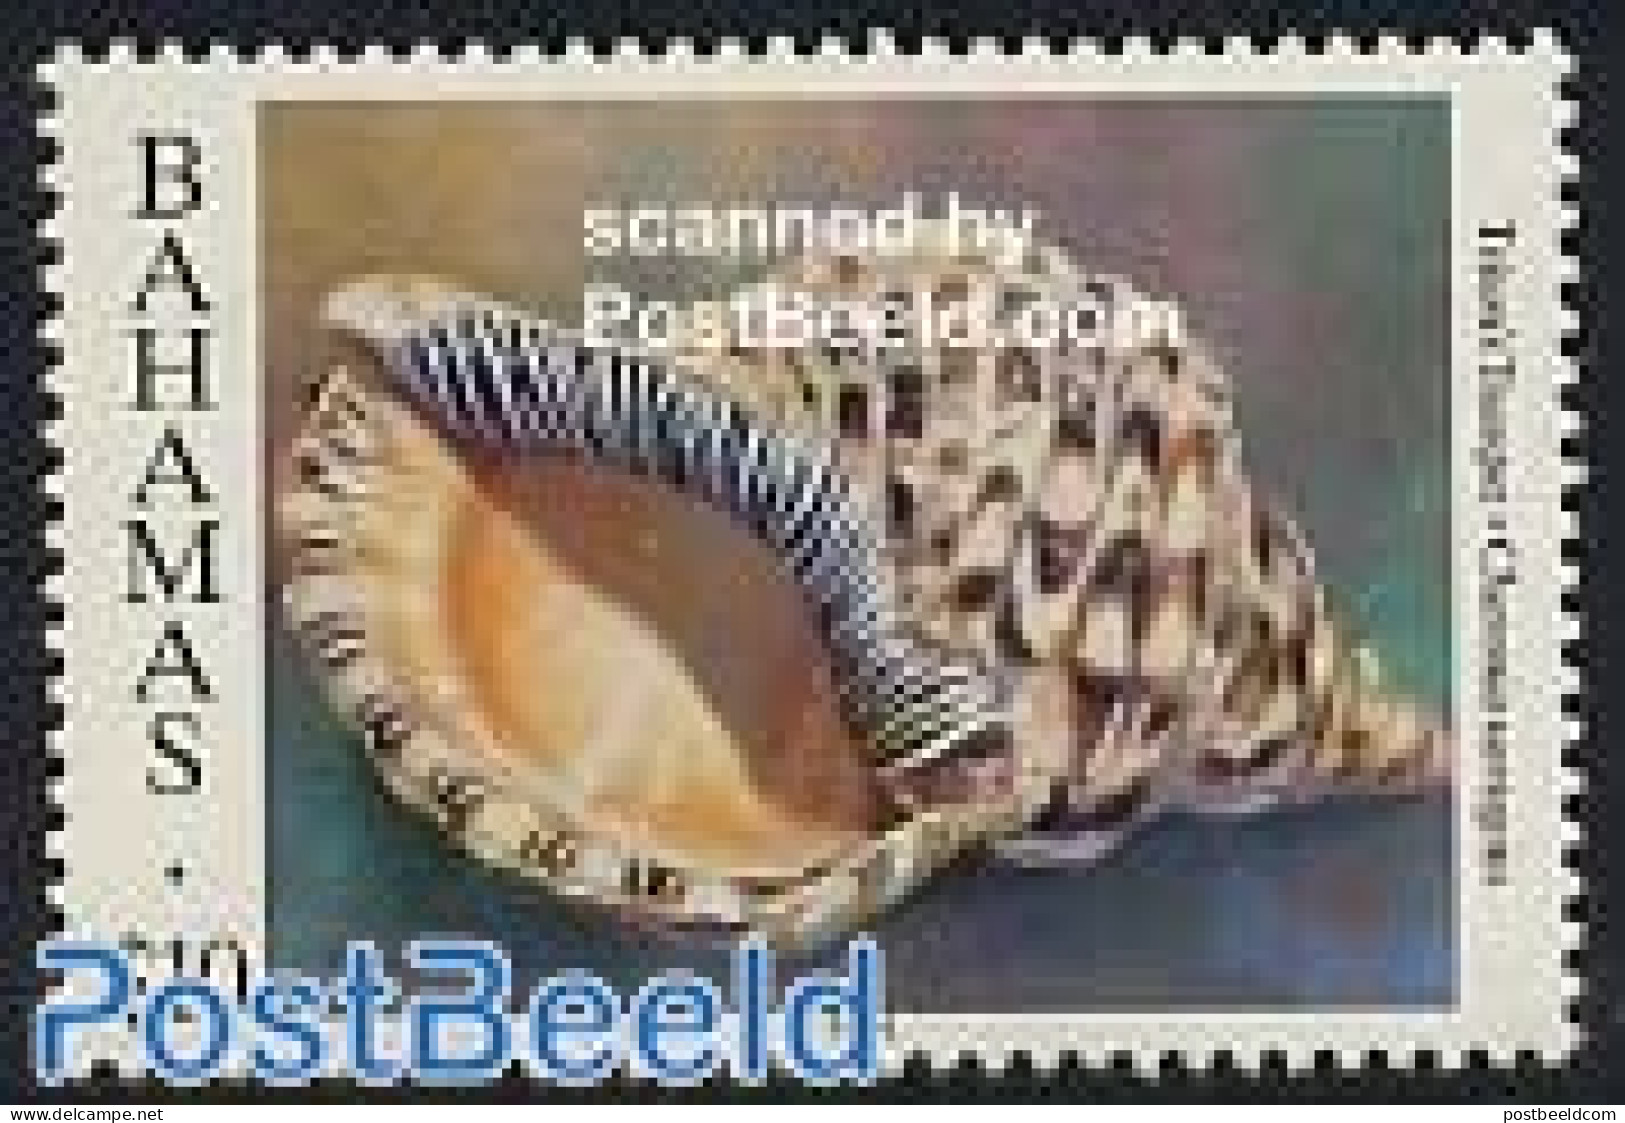 Bahamas 1996 Shell 1v (with Year 1996), Mint NH, Nature - Shells & Crustaceans - Marine Life